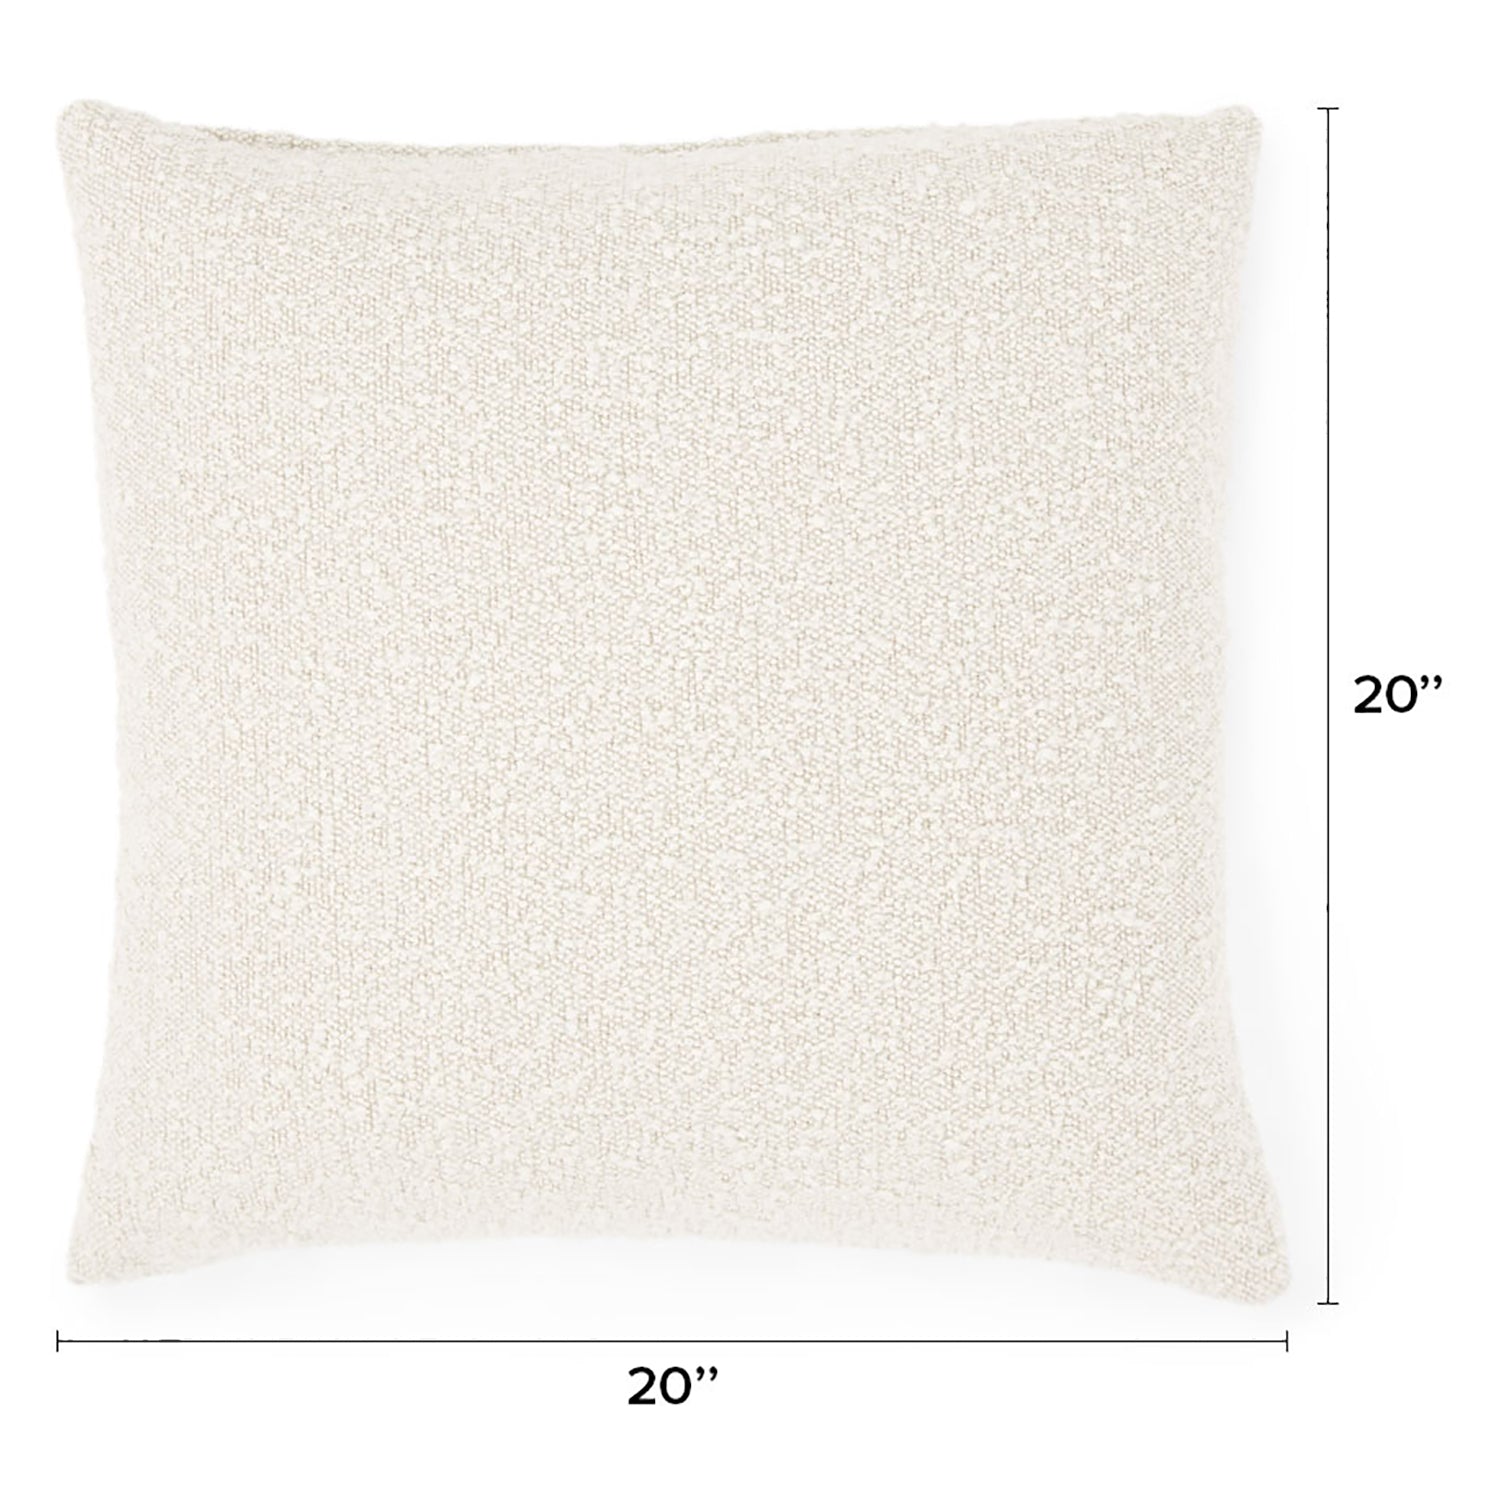 Gabriola Fur Fabric 20x20 inches Cushion + Covers (Pack of 2) In Bright White Colour